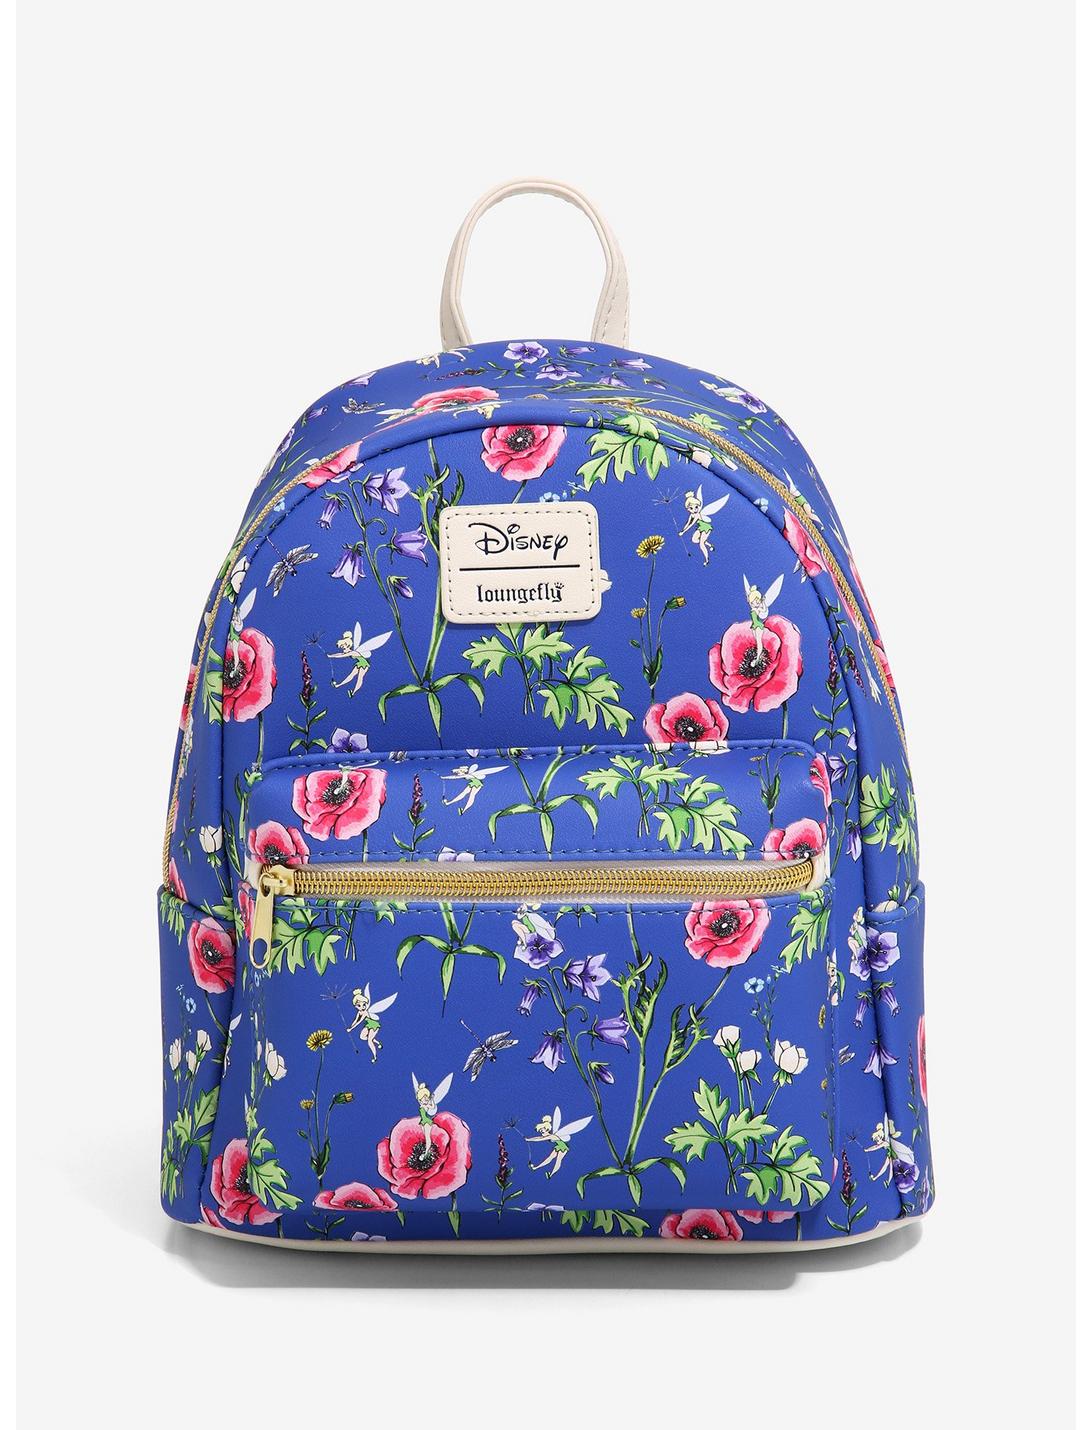 Loungefly Disney Peter Pan Tinker Bell Floral Mini Backpack, , hi-res